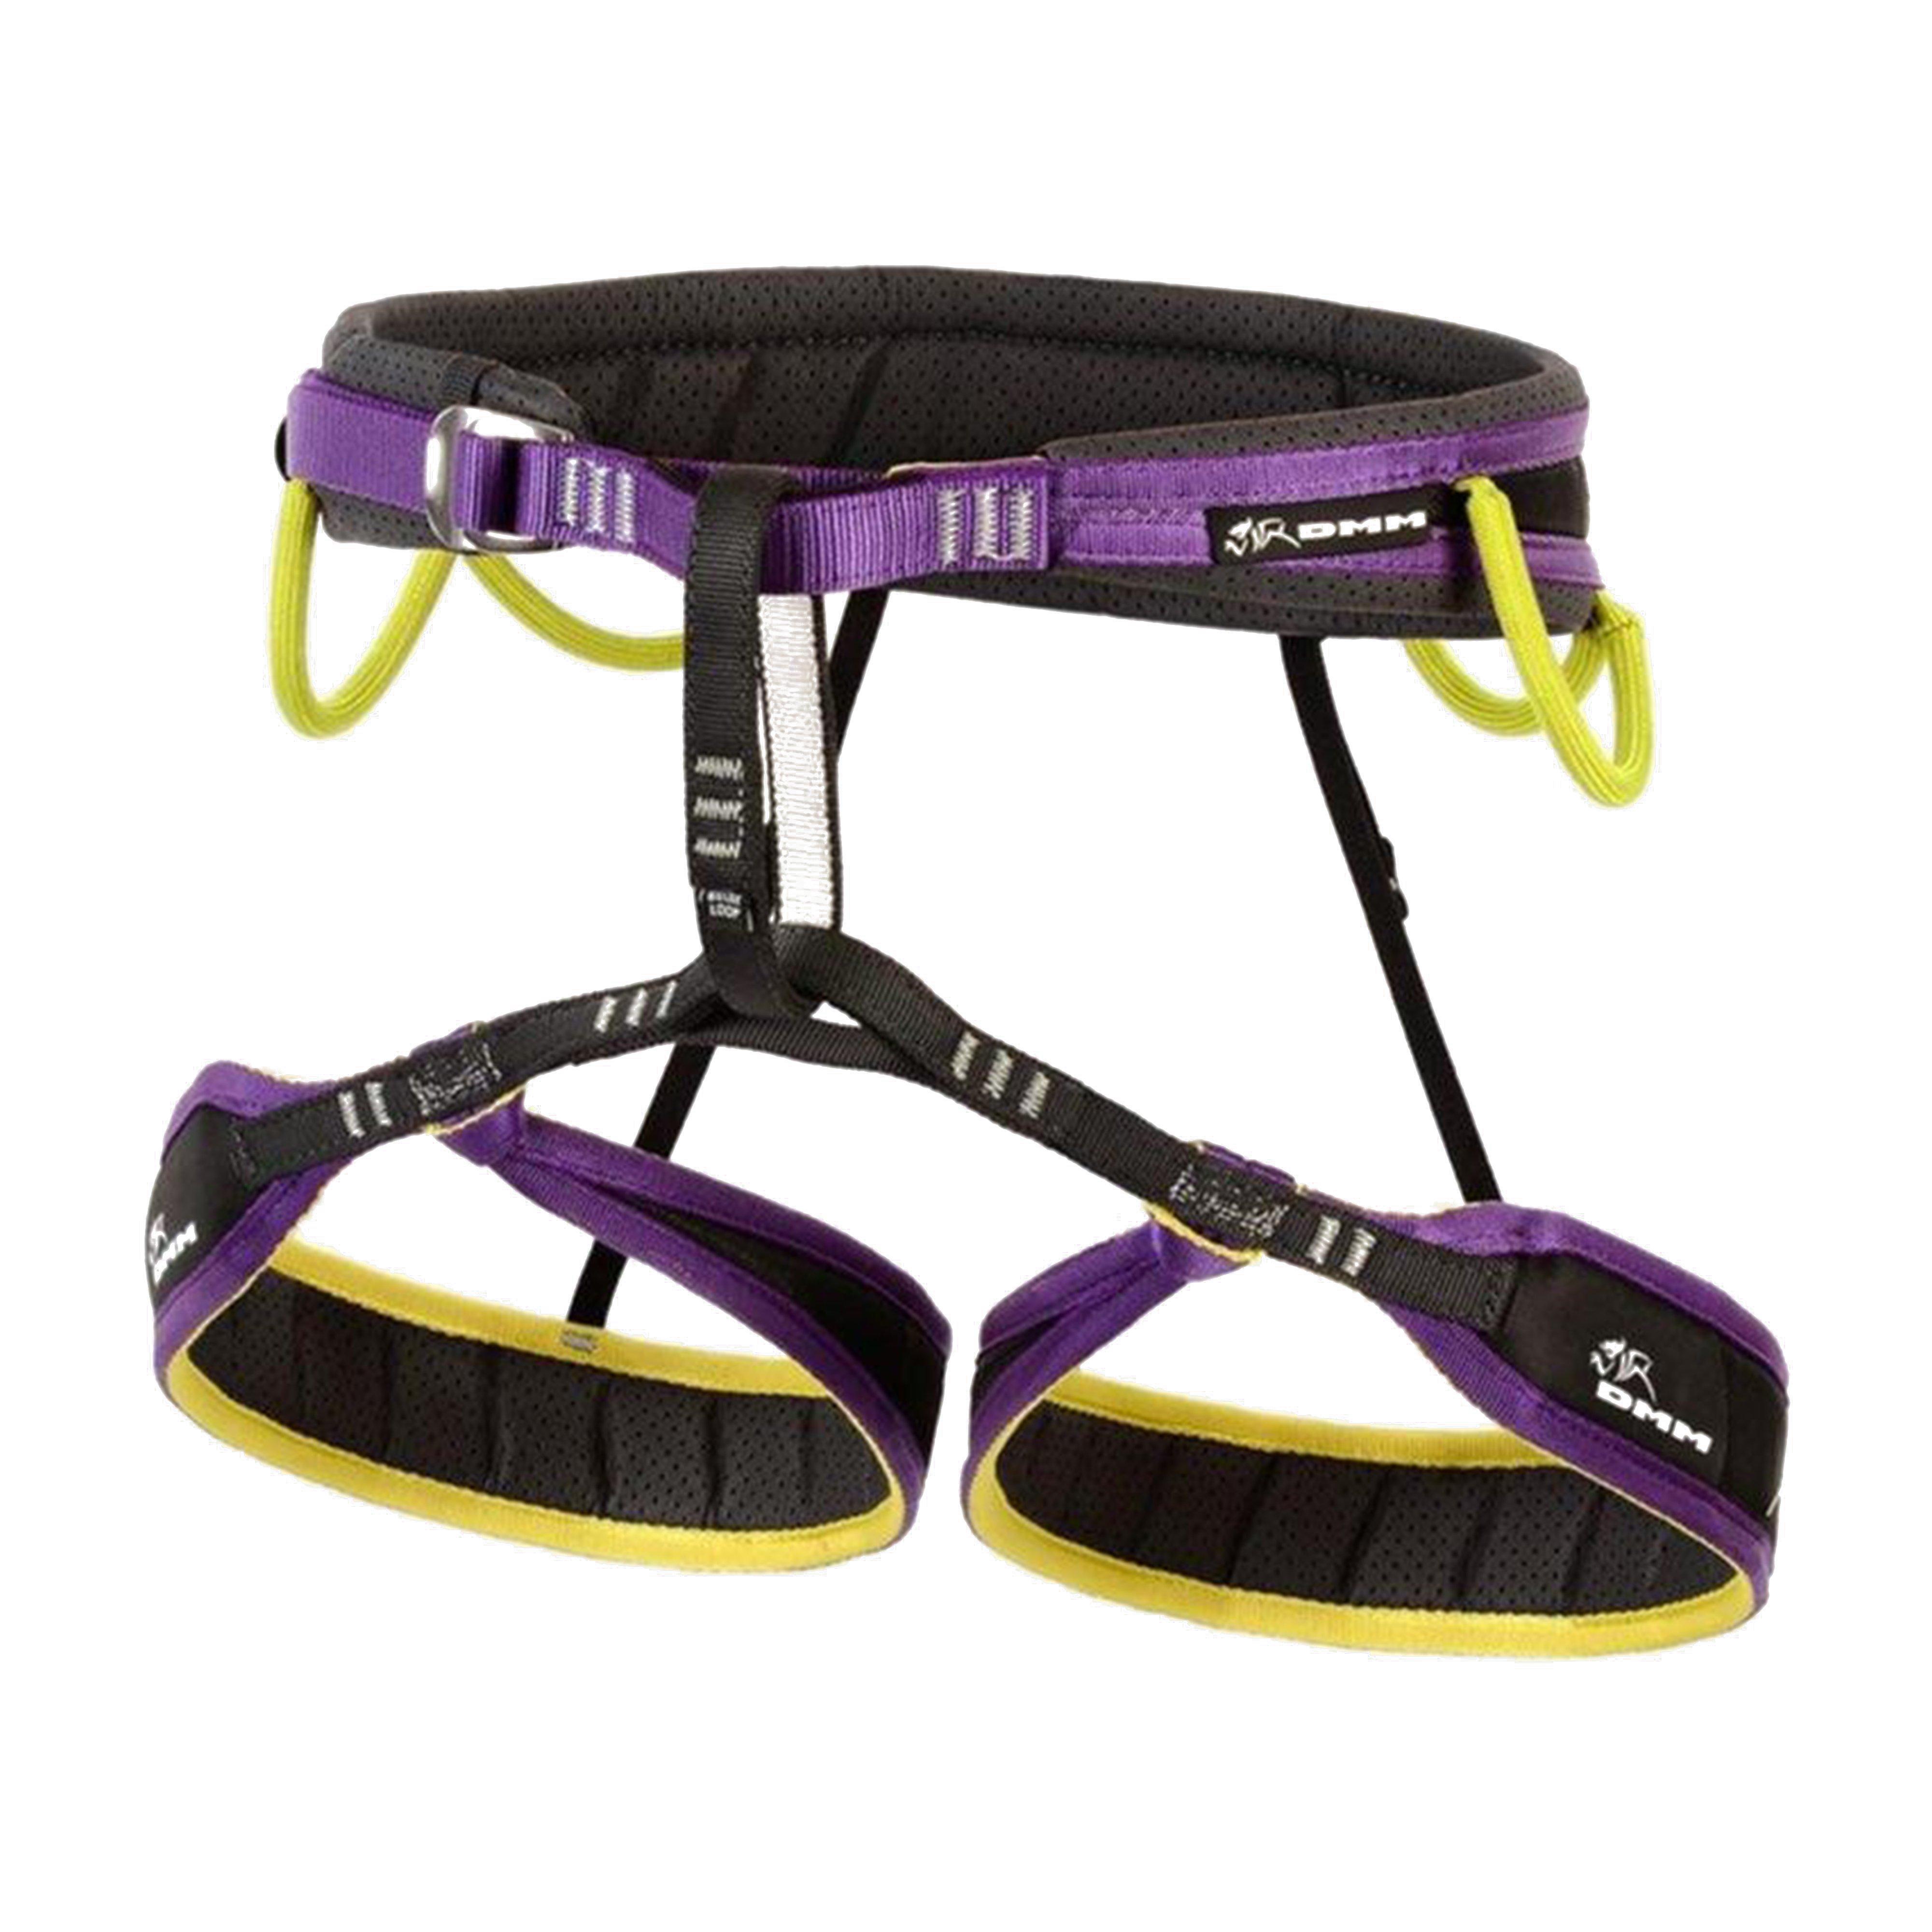 DMM TRANCE HARNESS Review